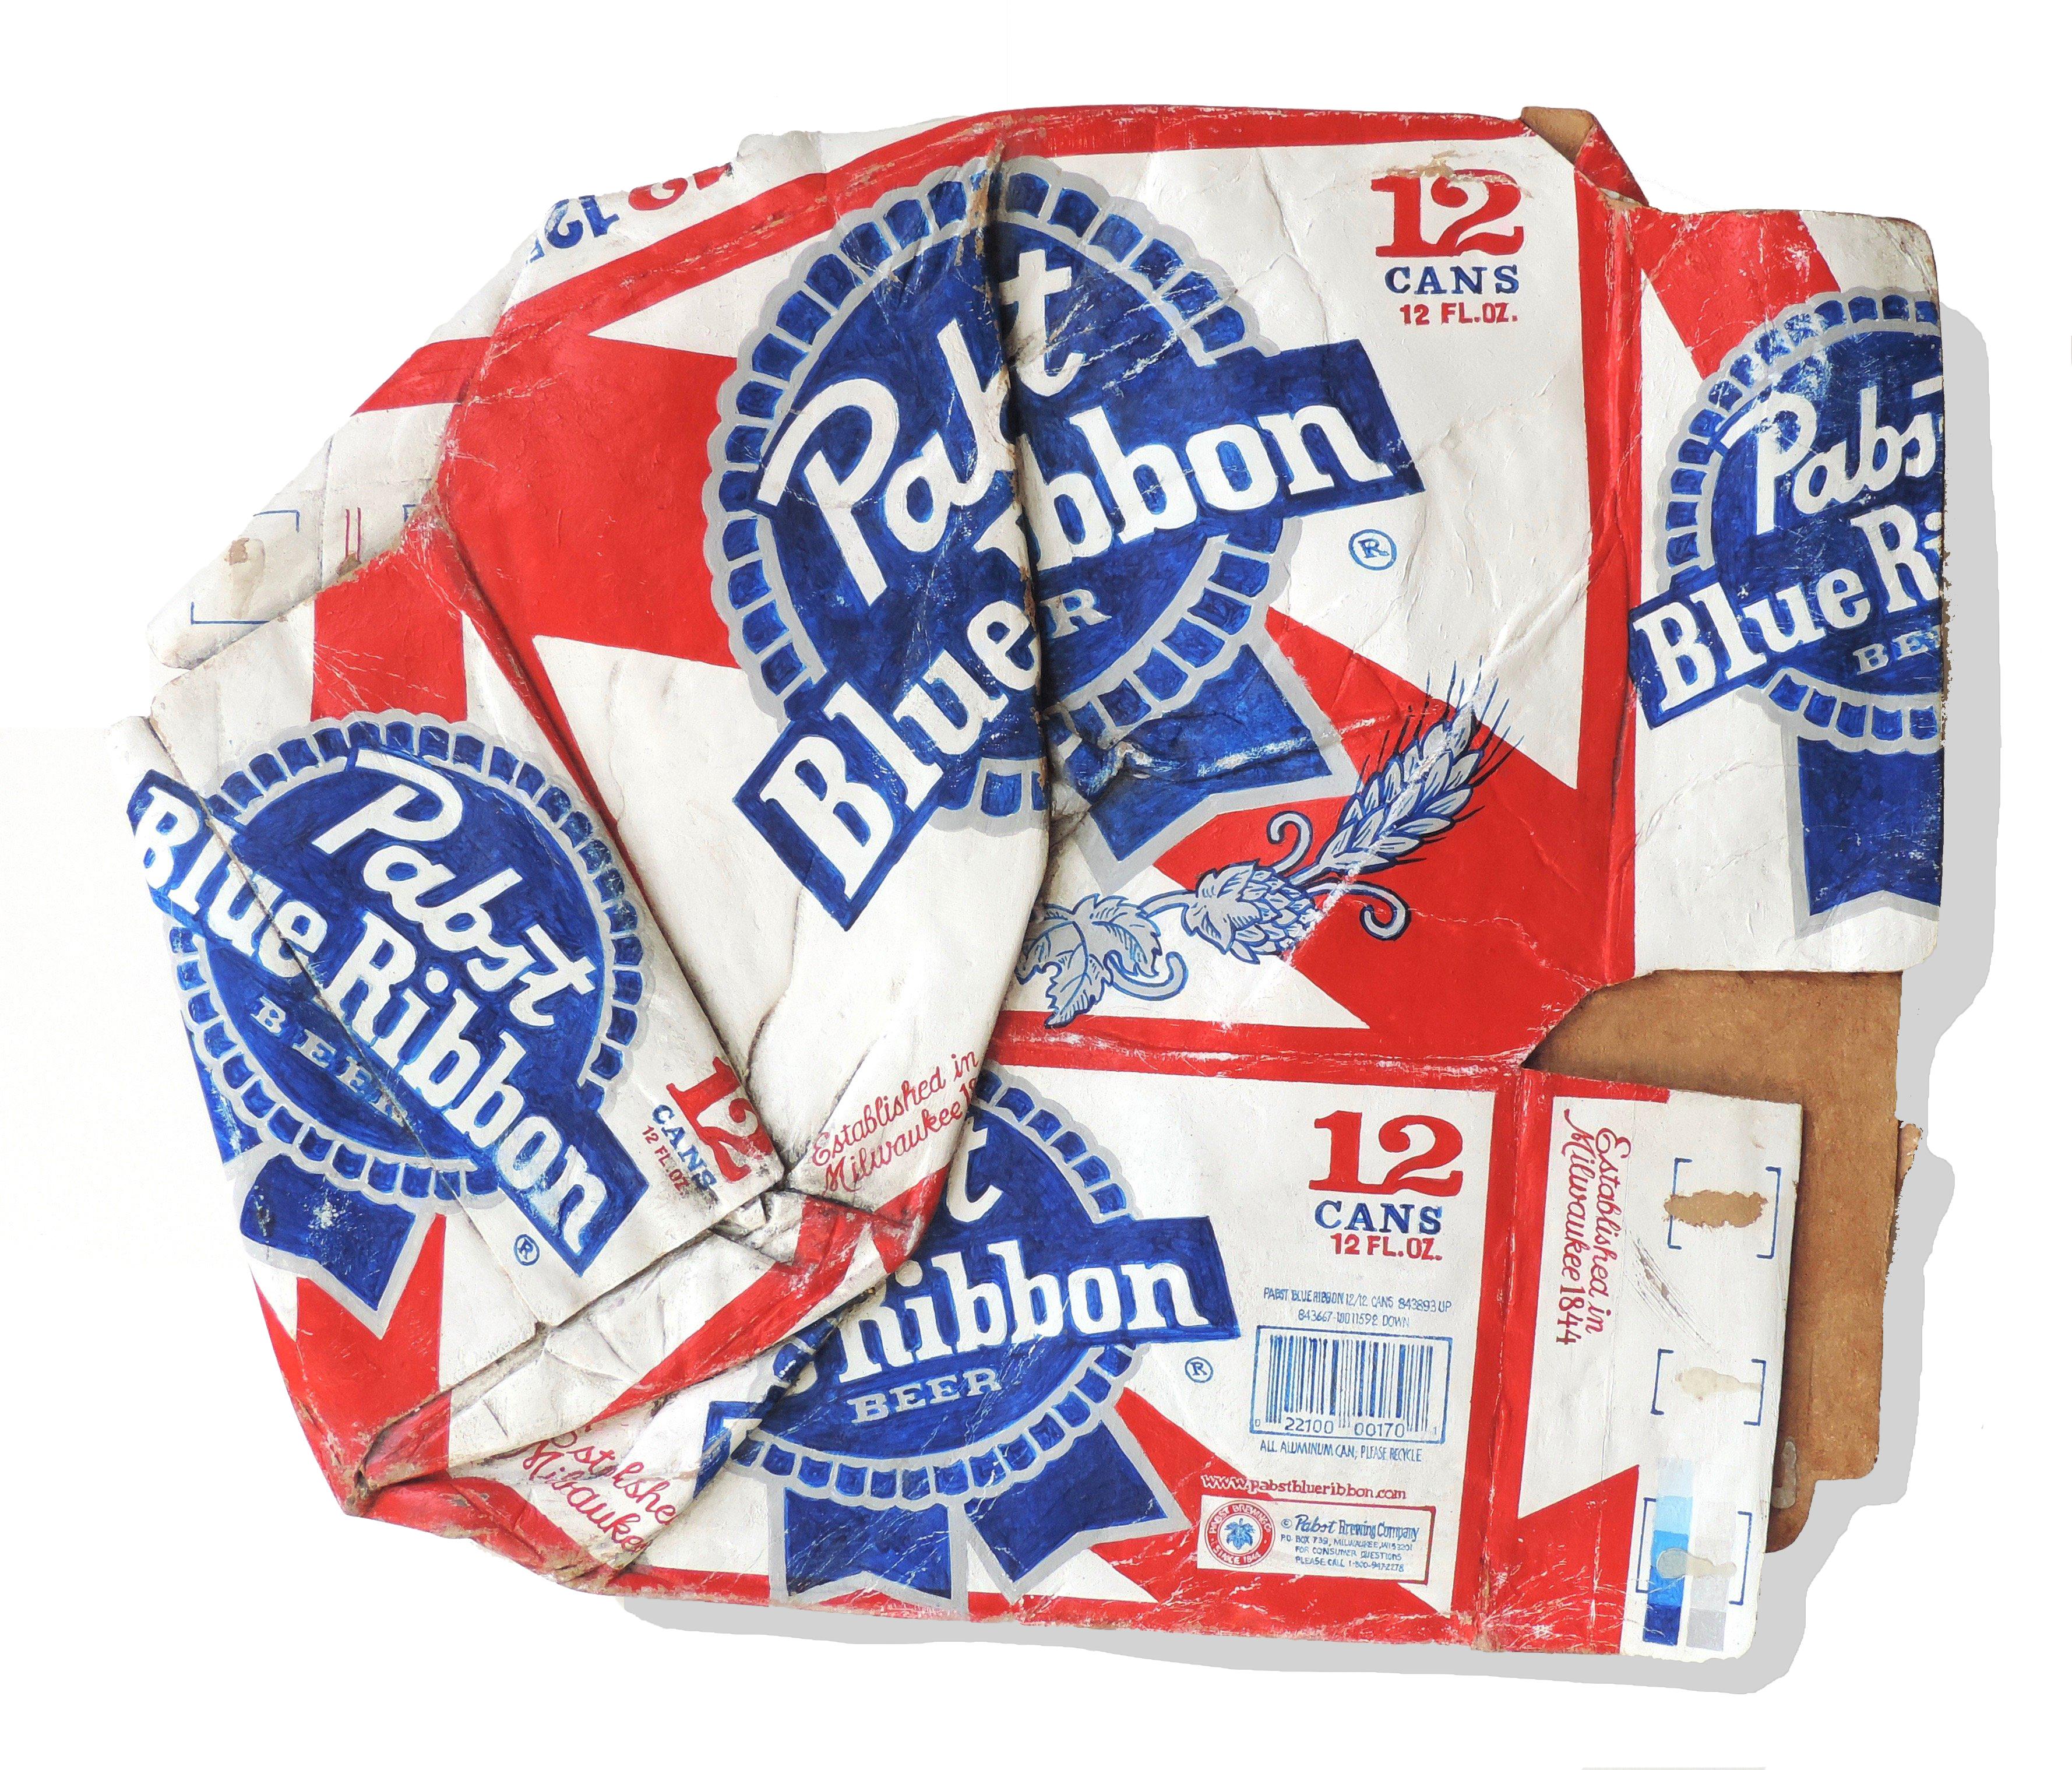 Tom Pfannerstill Still-Life Sculpture - Red white and blue hyperrealist sculpture, "Pabst Blue Ribbon", acrylic on wood